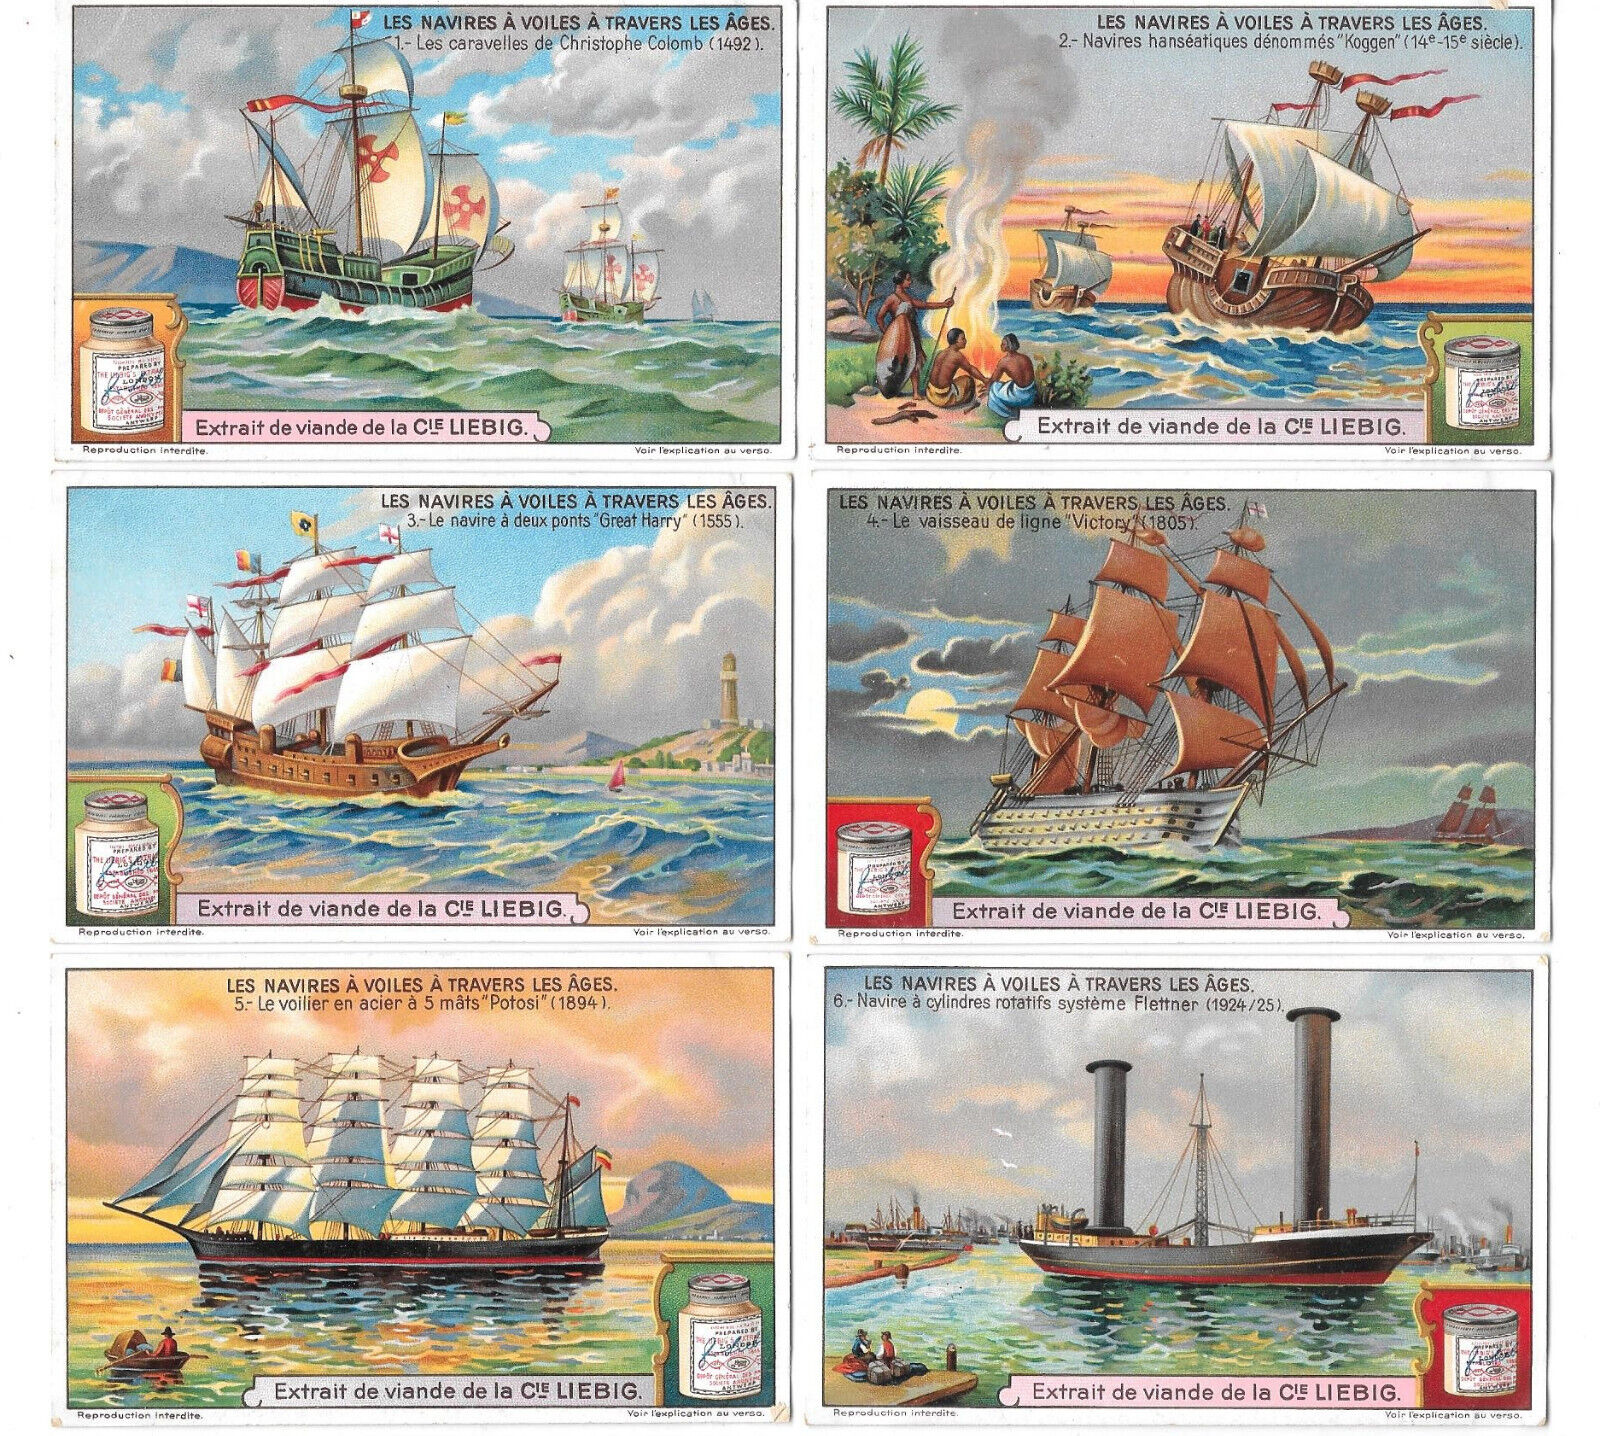 6x LIEBIG TRADE CARDS, SAILING SHIPS OF DIFFERENT TIMES 1927 (S1202 French).